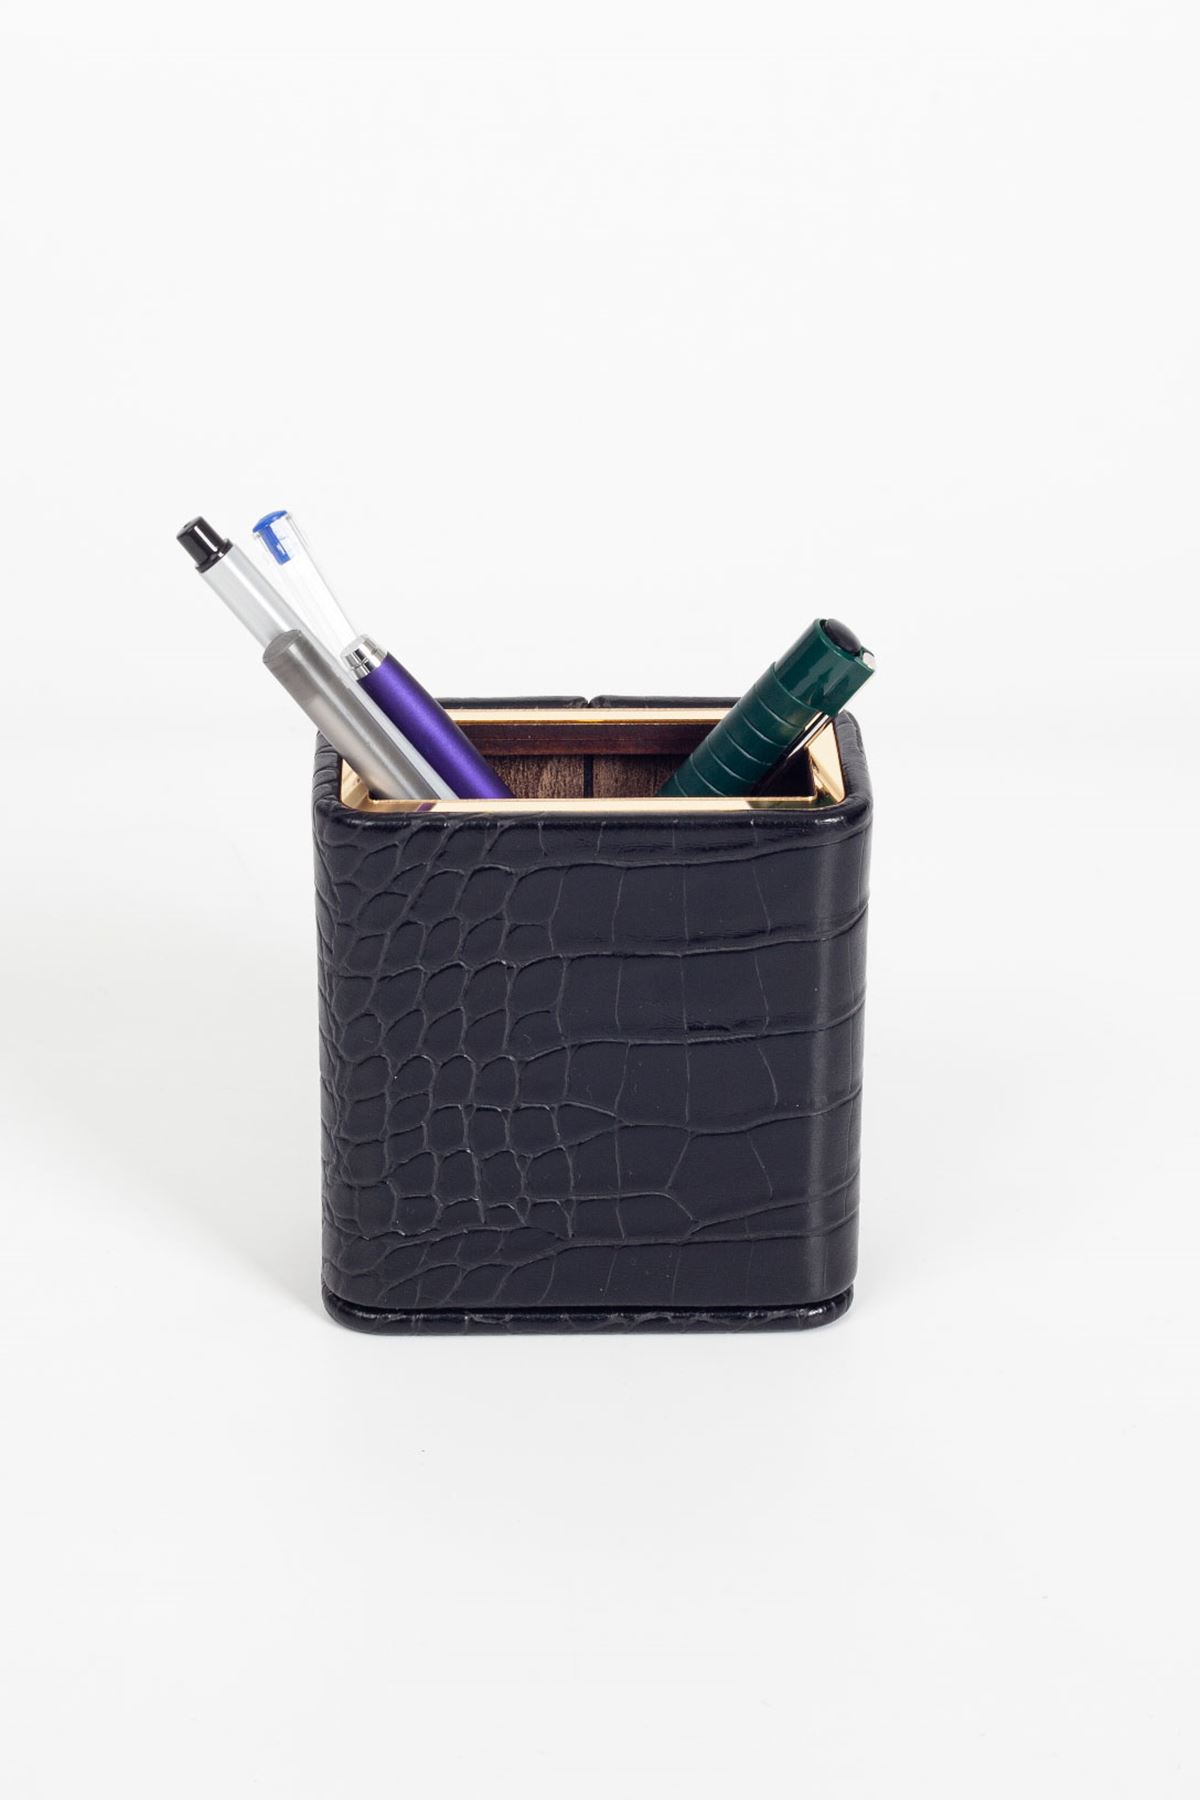 Croco Leather Pattern and Gold Detailed Pen Holder